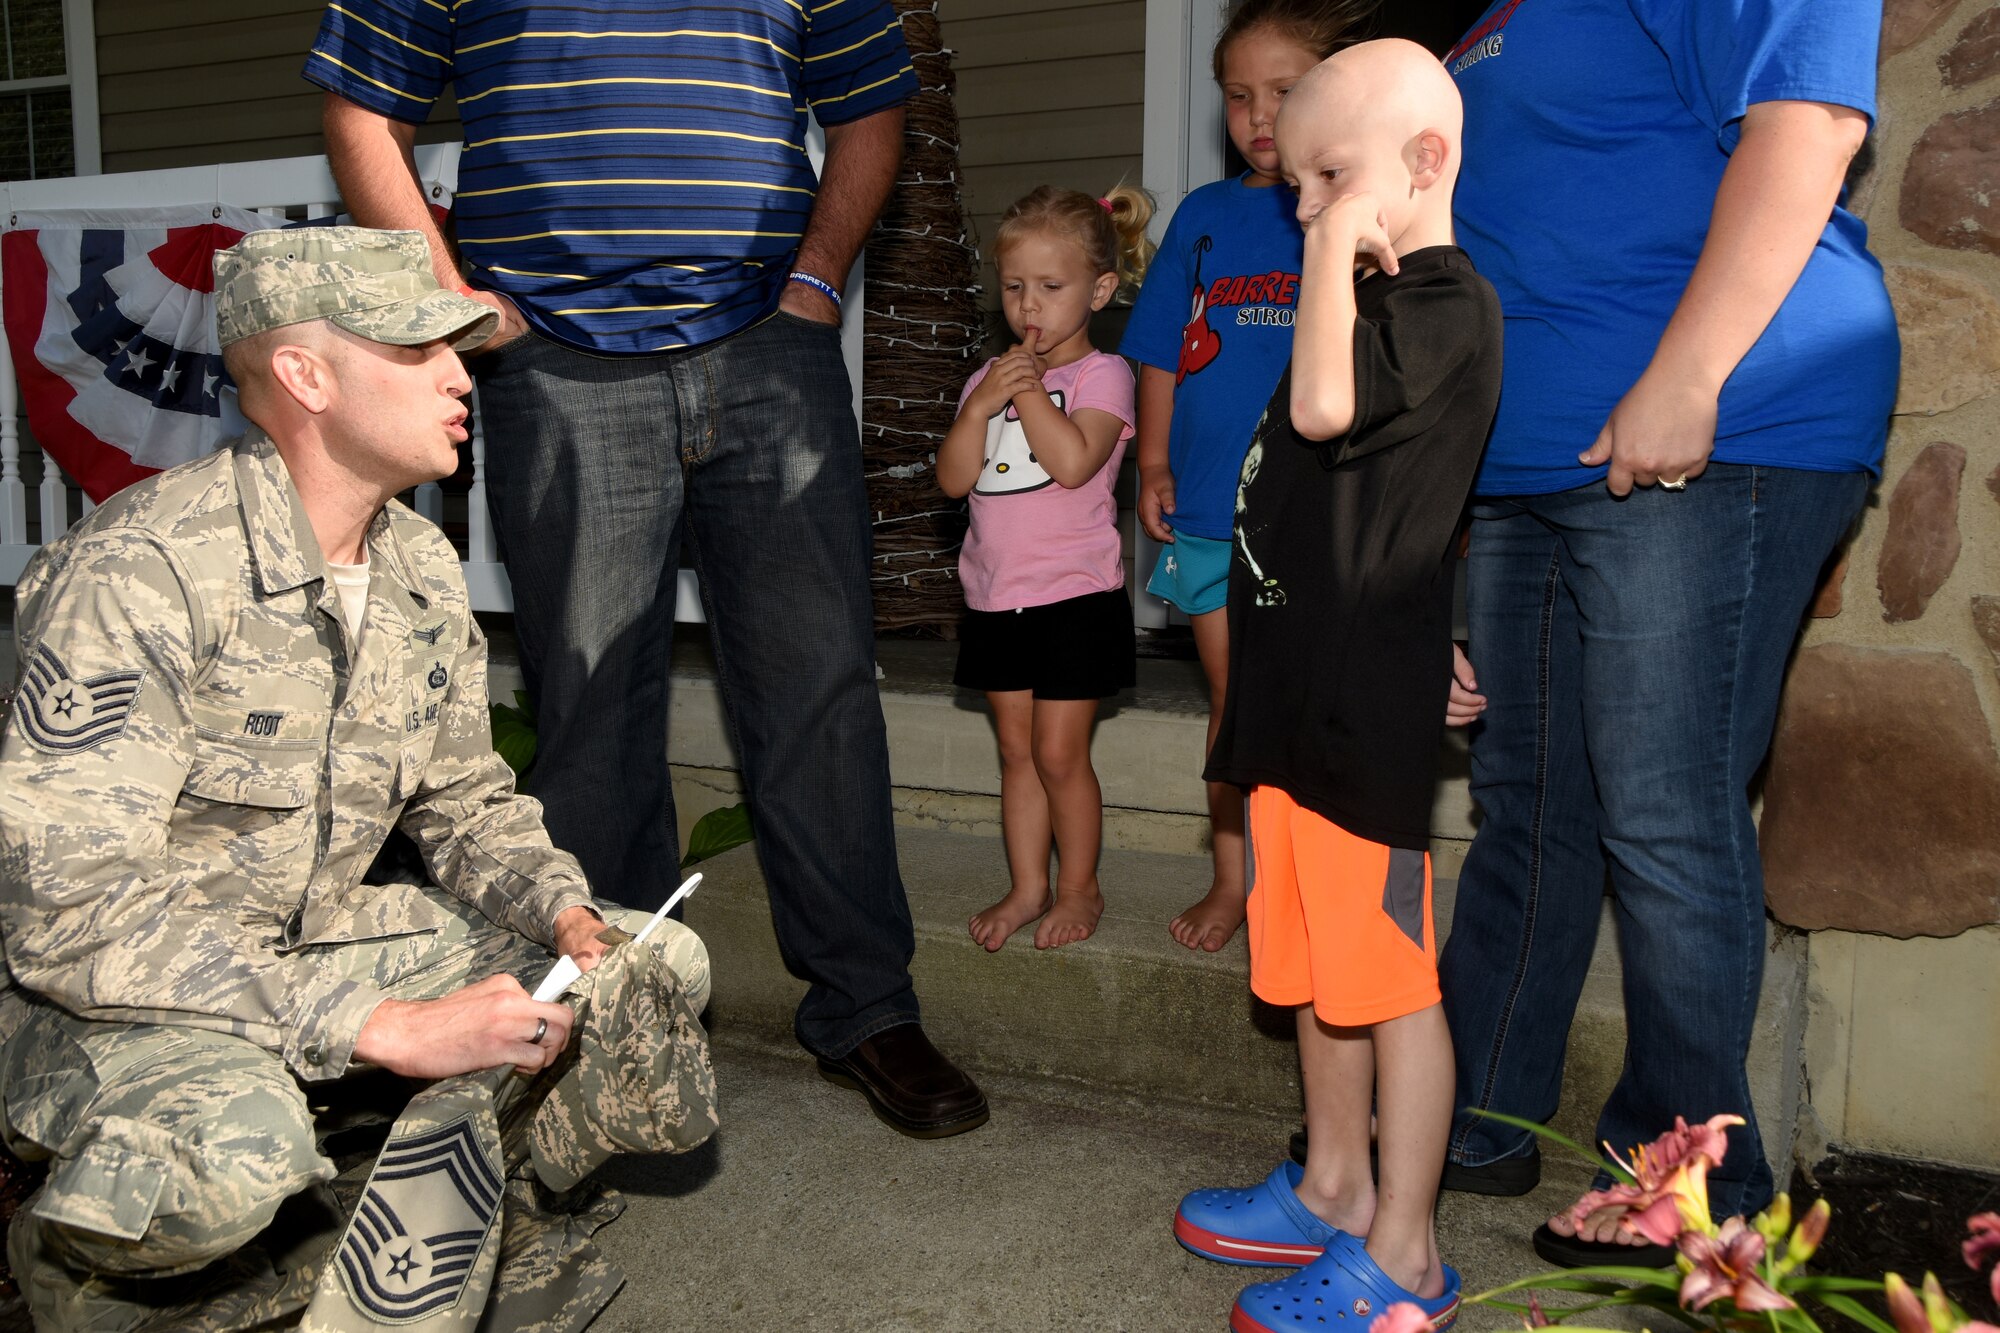 178th Wing member Tech. Sgt. Dallas Root, along with 15 other wing members, present Barrett Fitzsimmons with an honorary Chief Master Sgt. uniform June 26, at his home in Springfield Ohio. 
Fitzsimmons was recently diagnosed with stage four Hepatocellular Carcinoma.